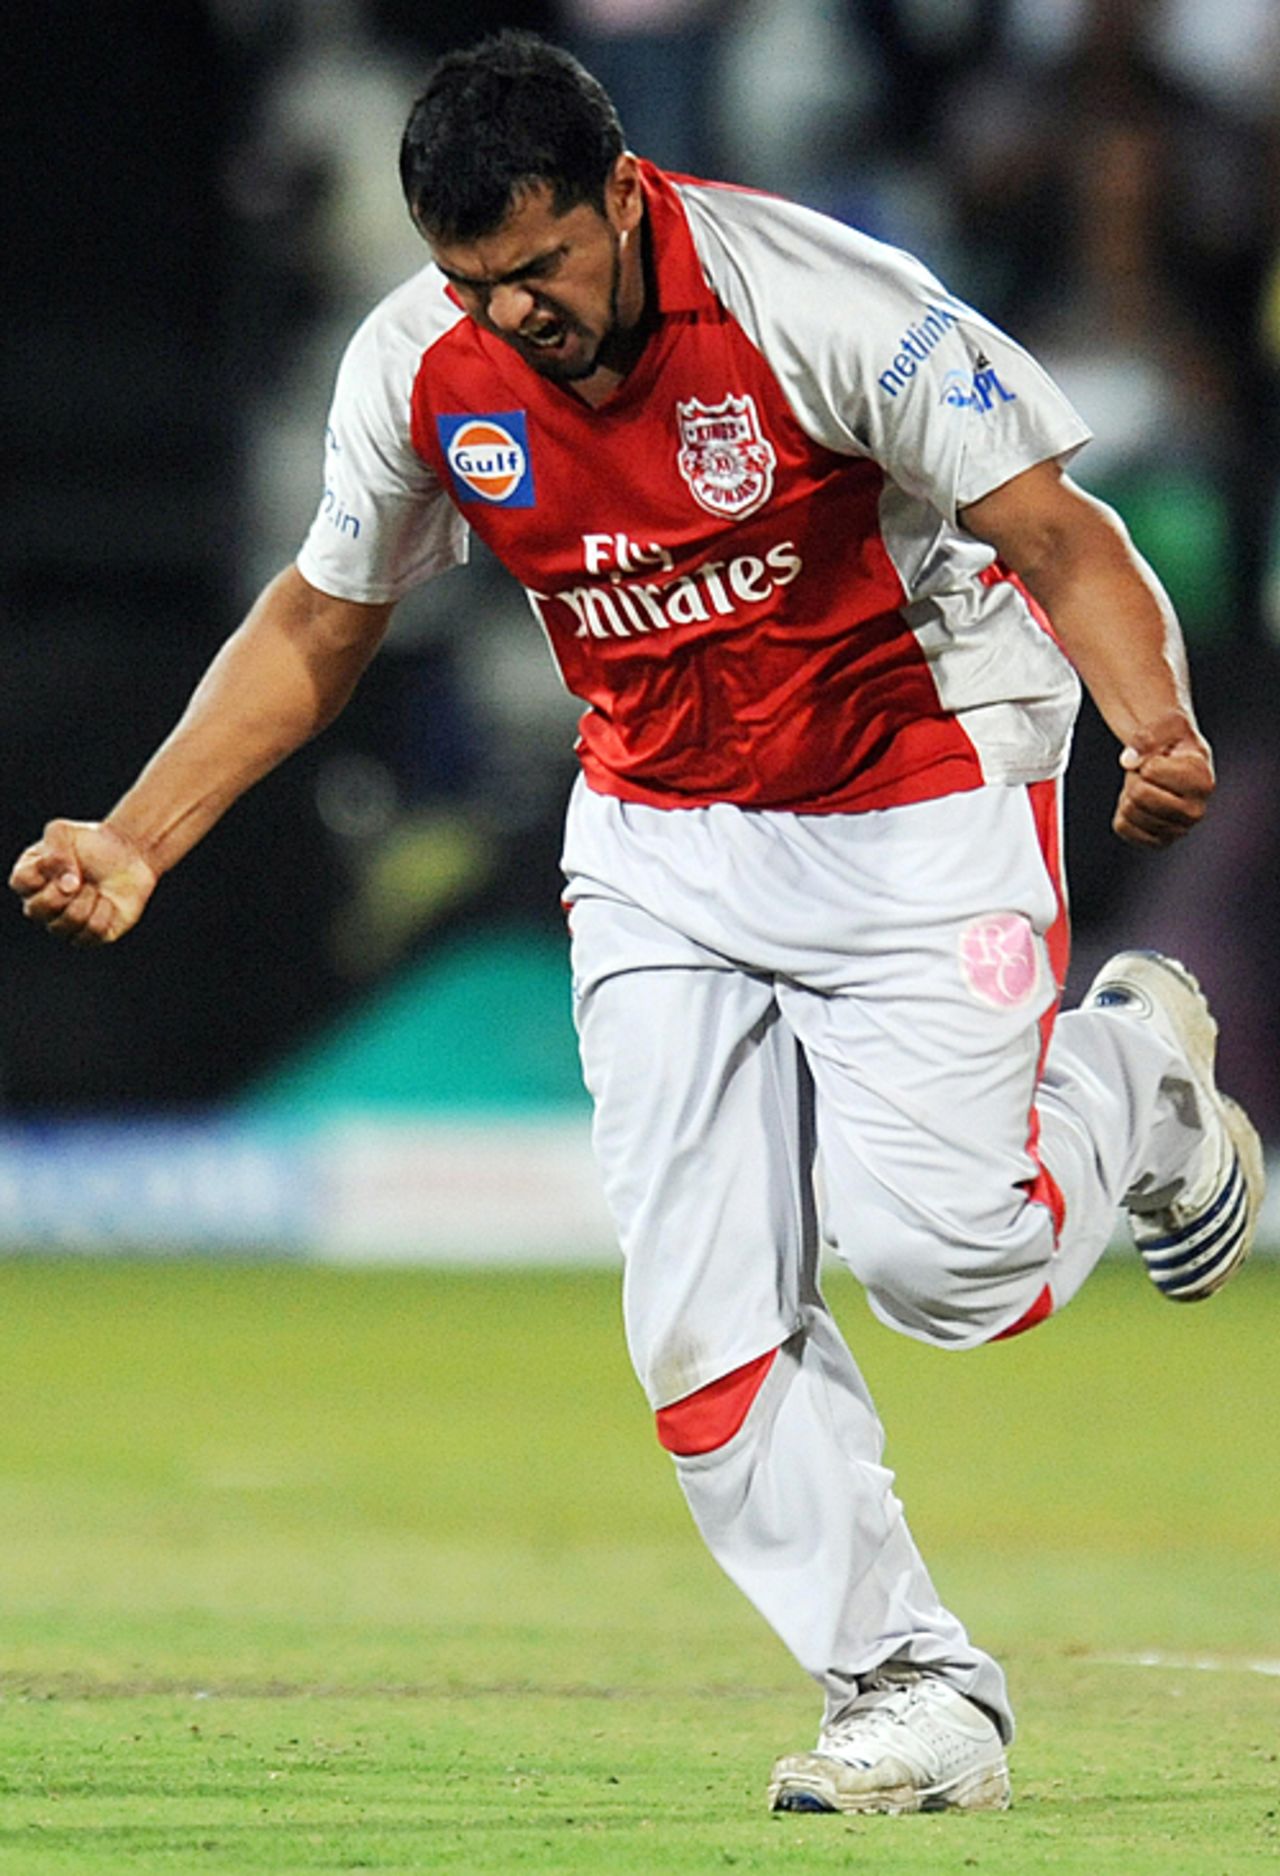 Yusuf Abdulla is delighted after removing Anil Kumble, Royal Challengers Bangalore v Kings XI Punjab, 24th match, IPL, May 1, 2009